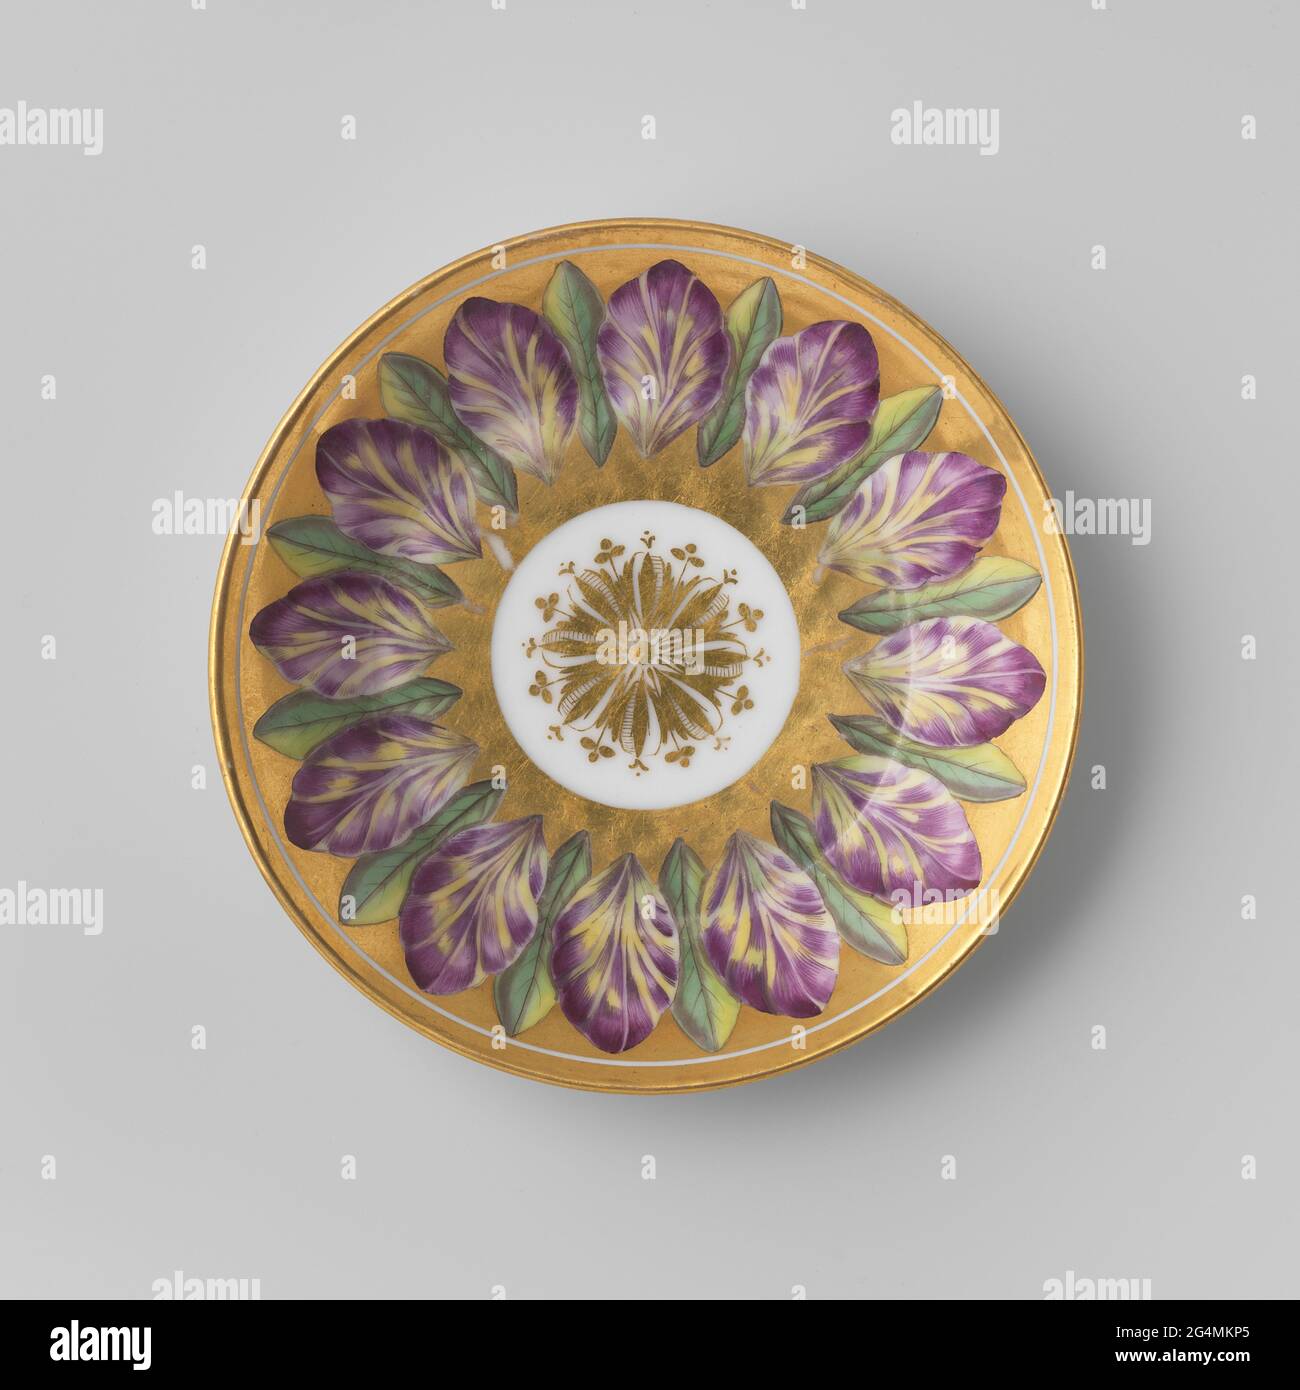 Dish with leafwork on golden fond. Dish of porcelain, decorated with purple and green leaves on golden fond. Stock Photo